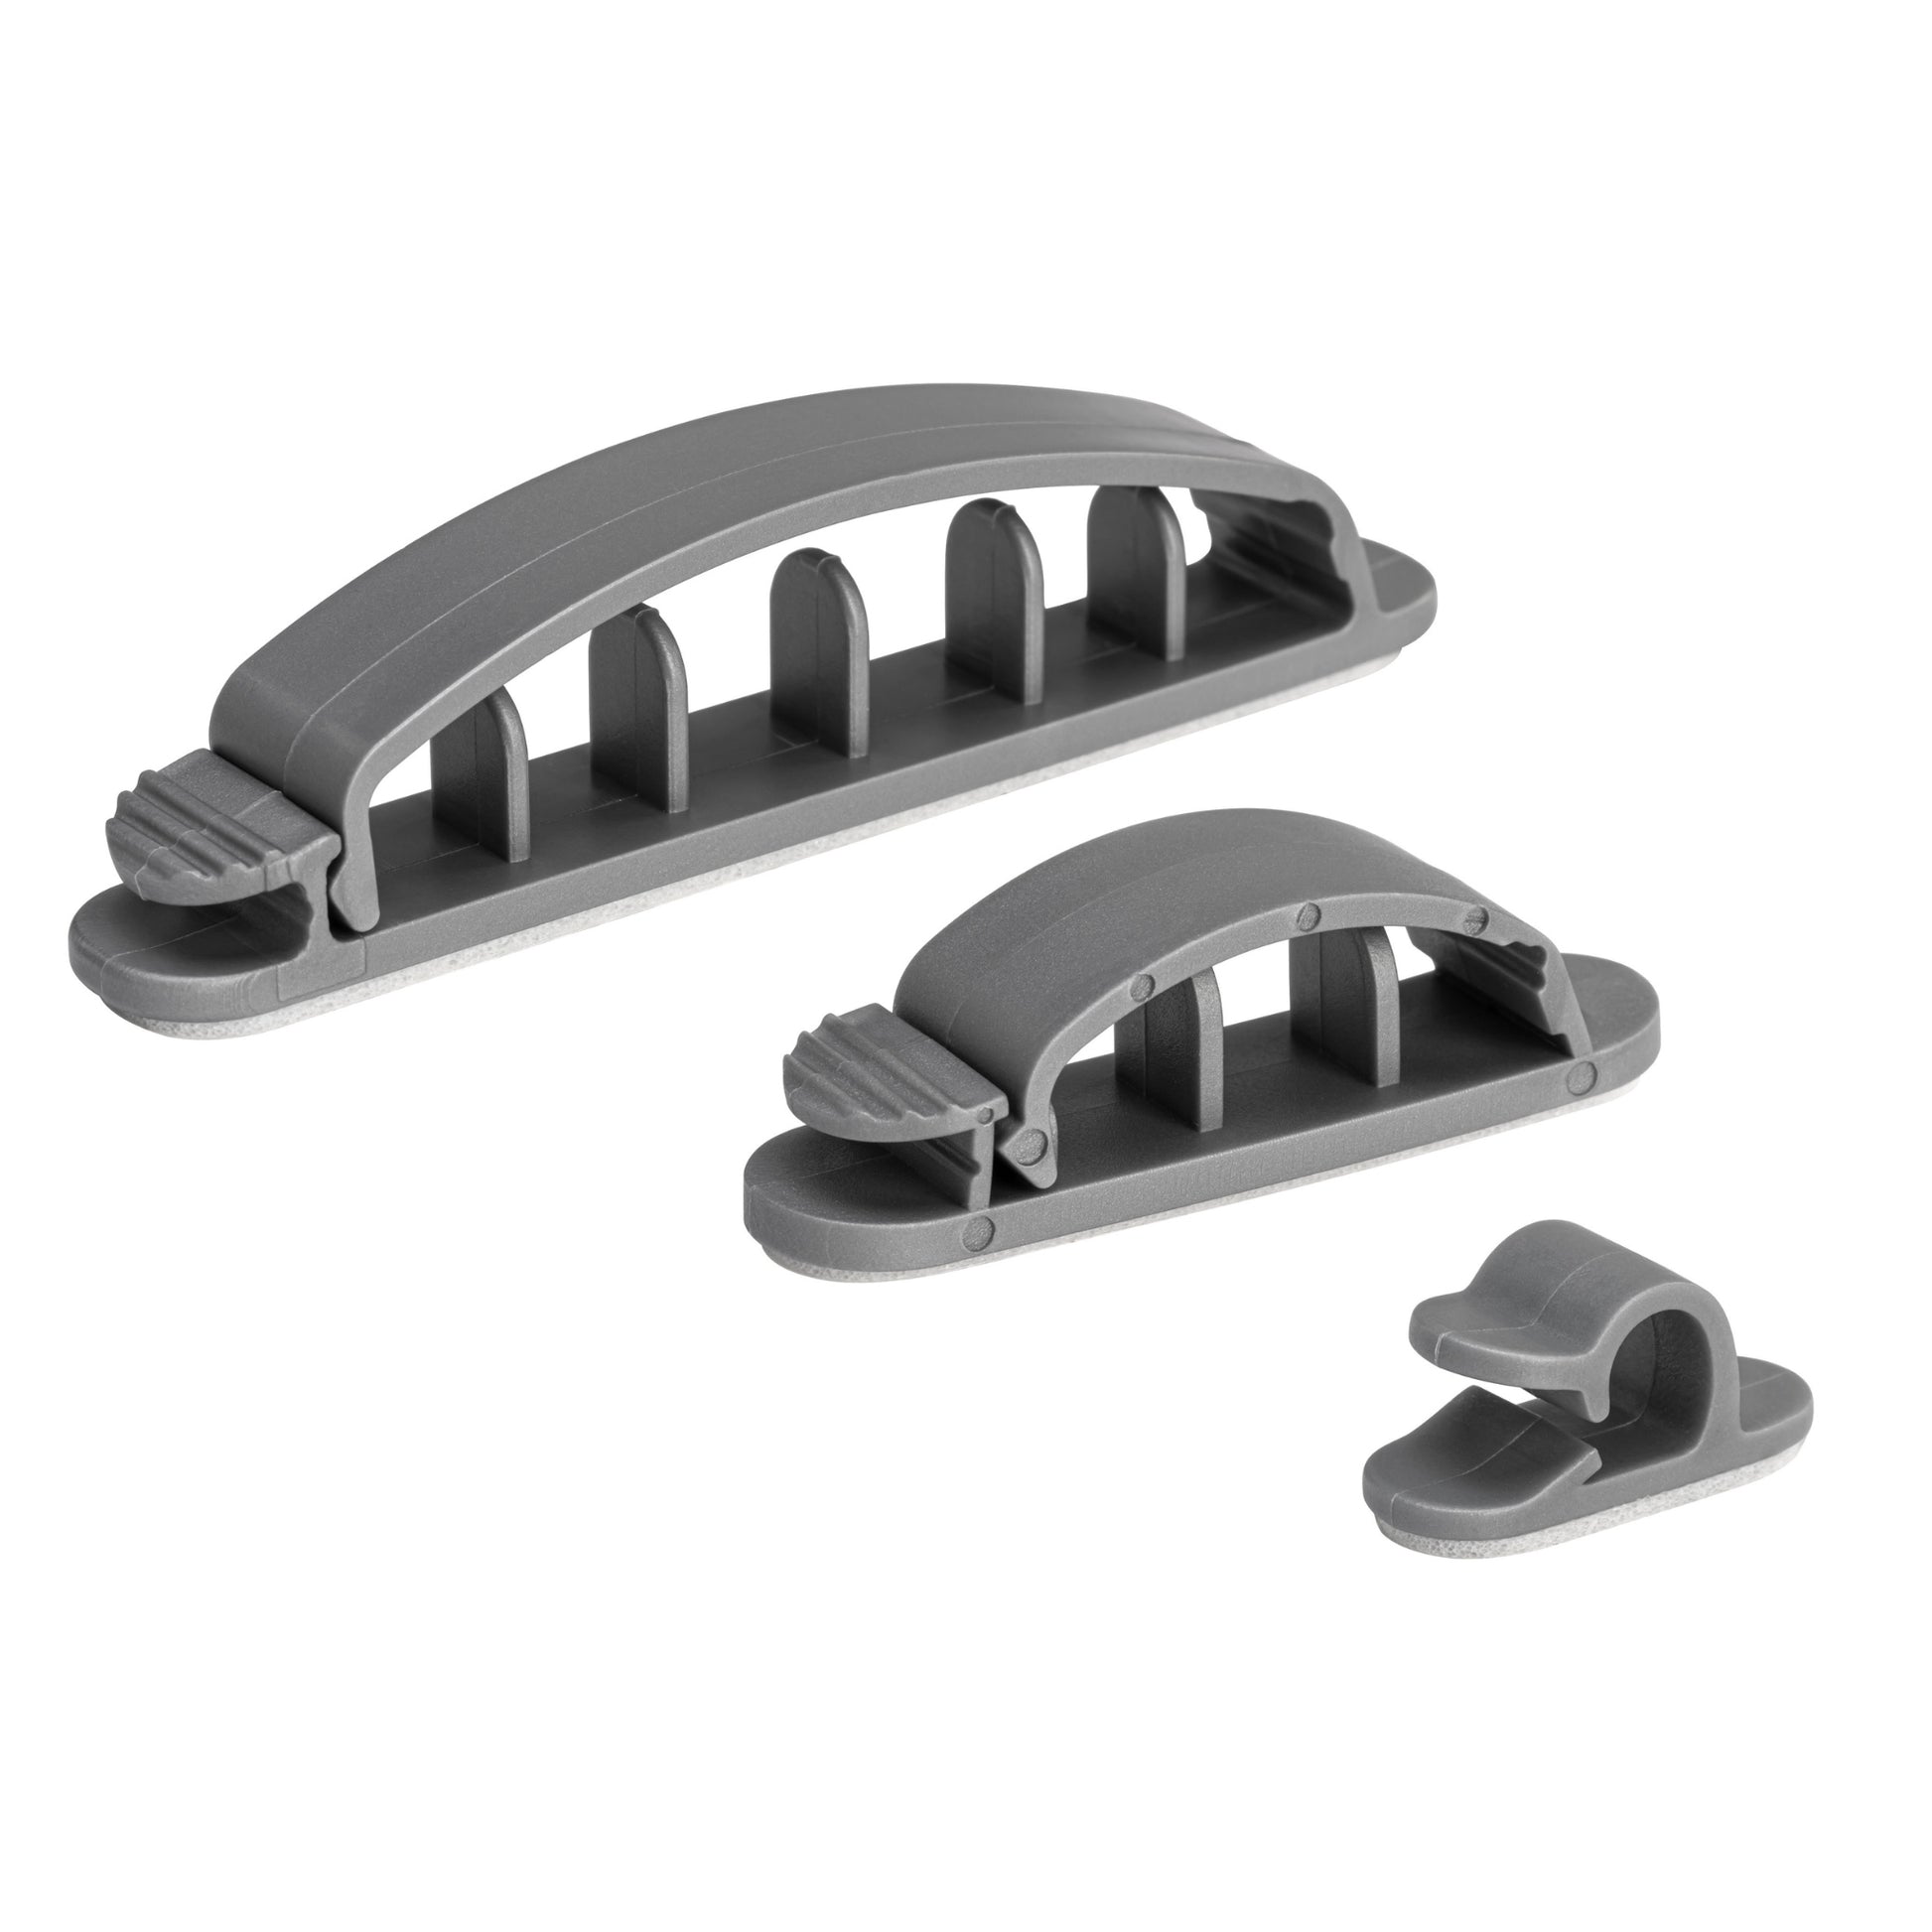 DO-11 Cable Clips Set